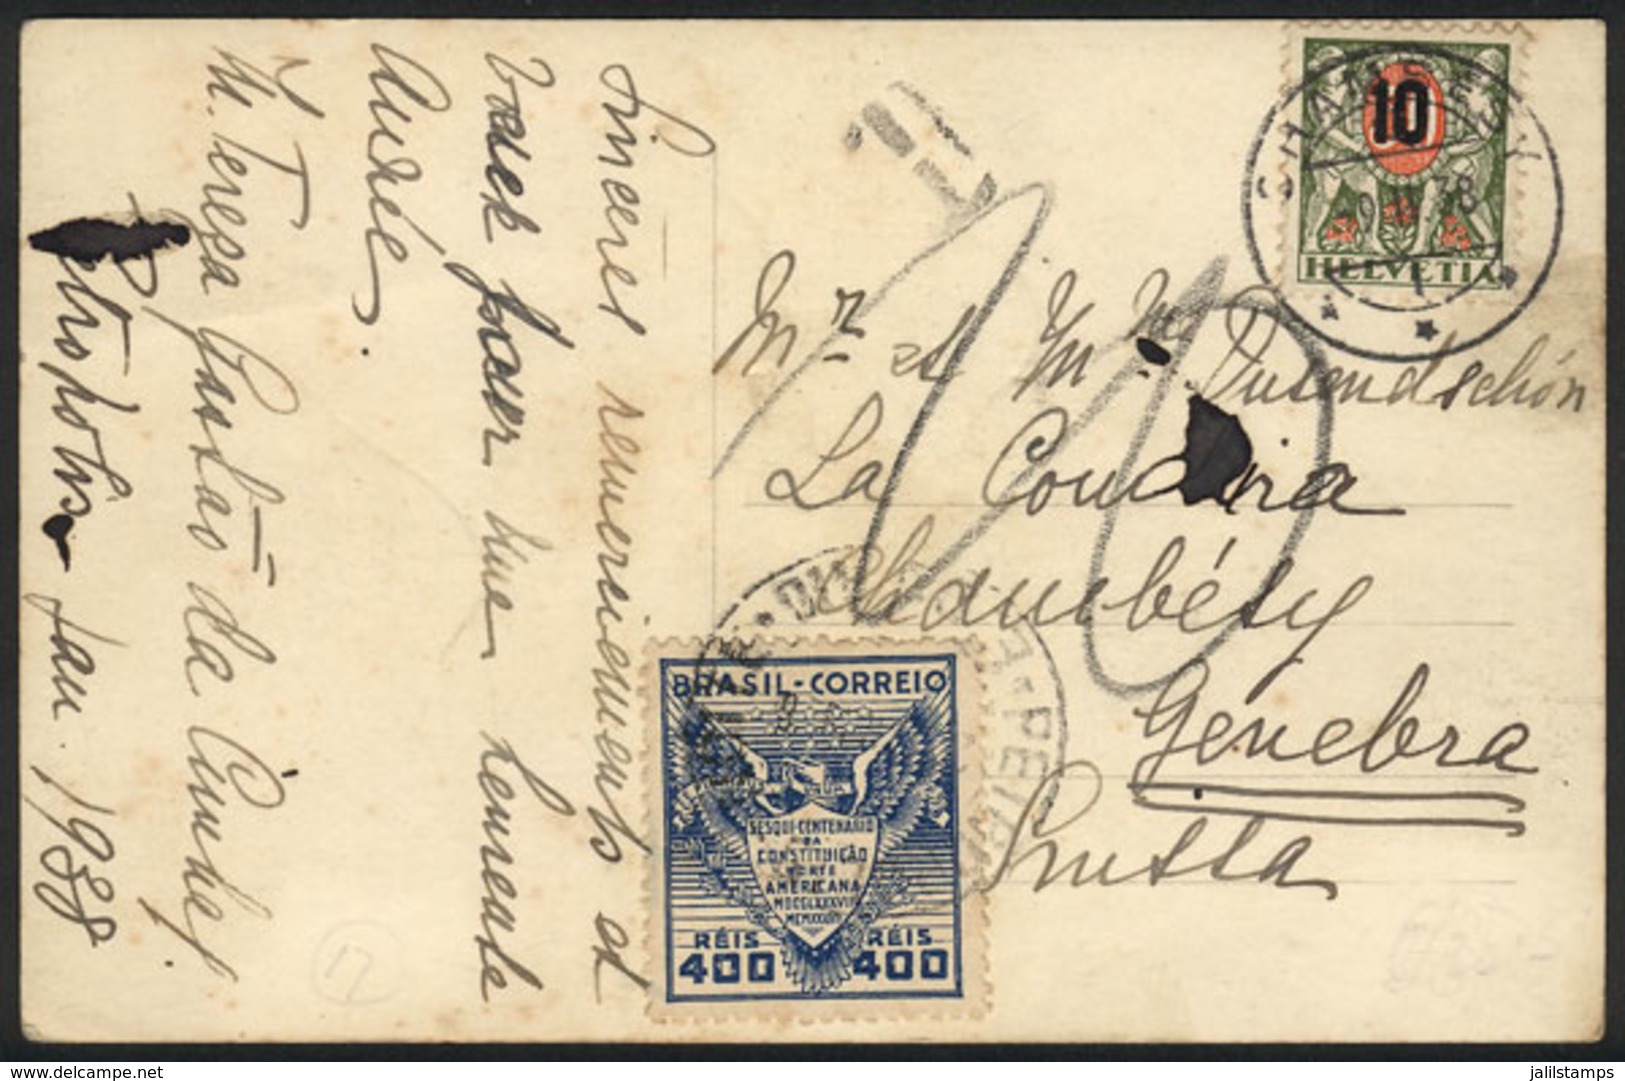 BRAZIL: Postcard Sent From Petropolis To Switzerland On 9/JA/1938, Franked By RHM-C126 ALONE, Upon Arrival It Received A - Prephilately